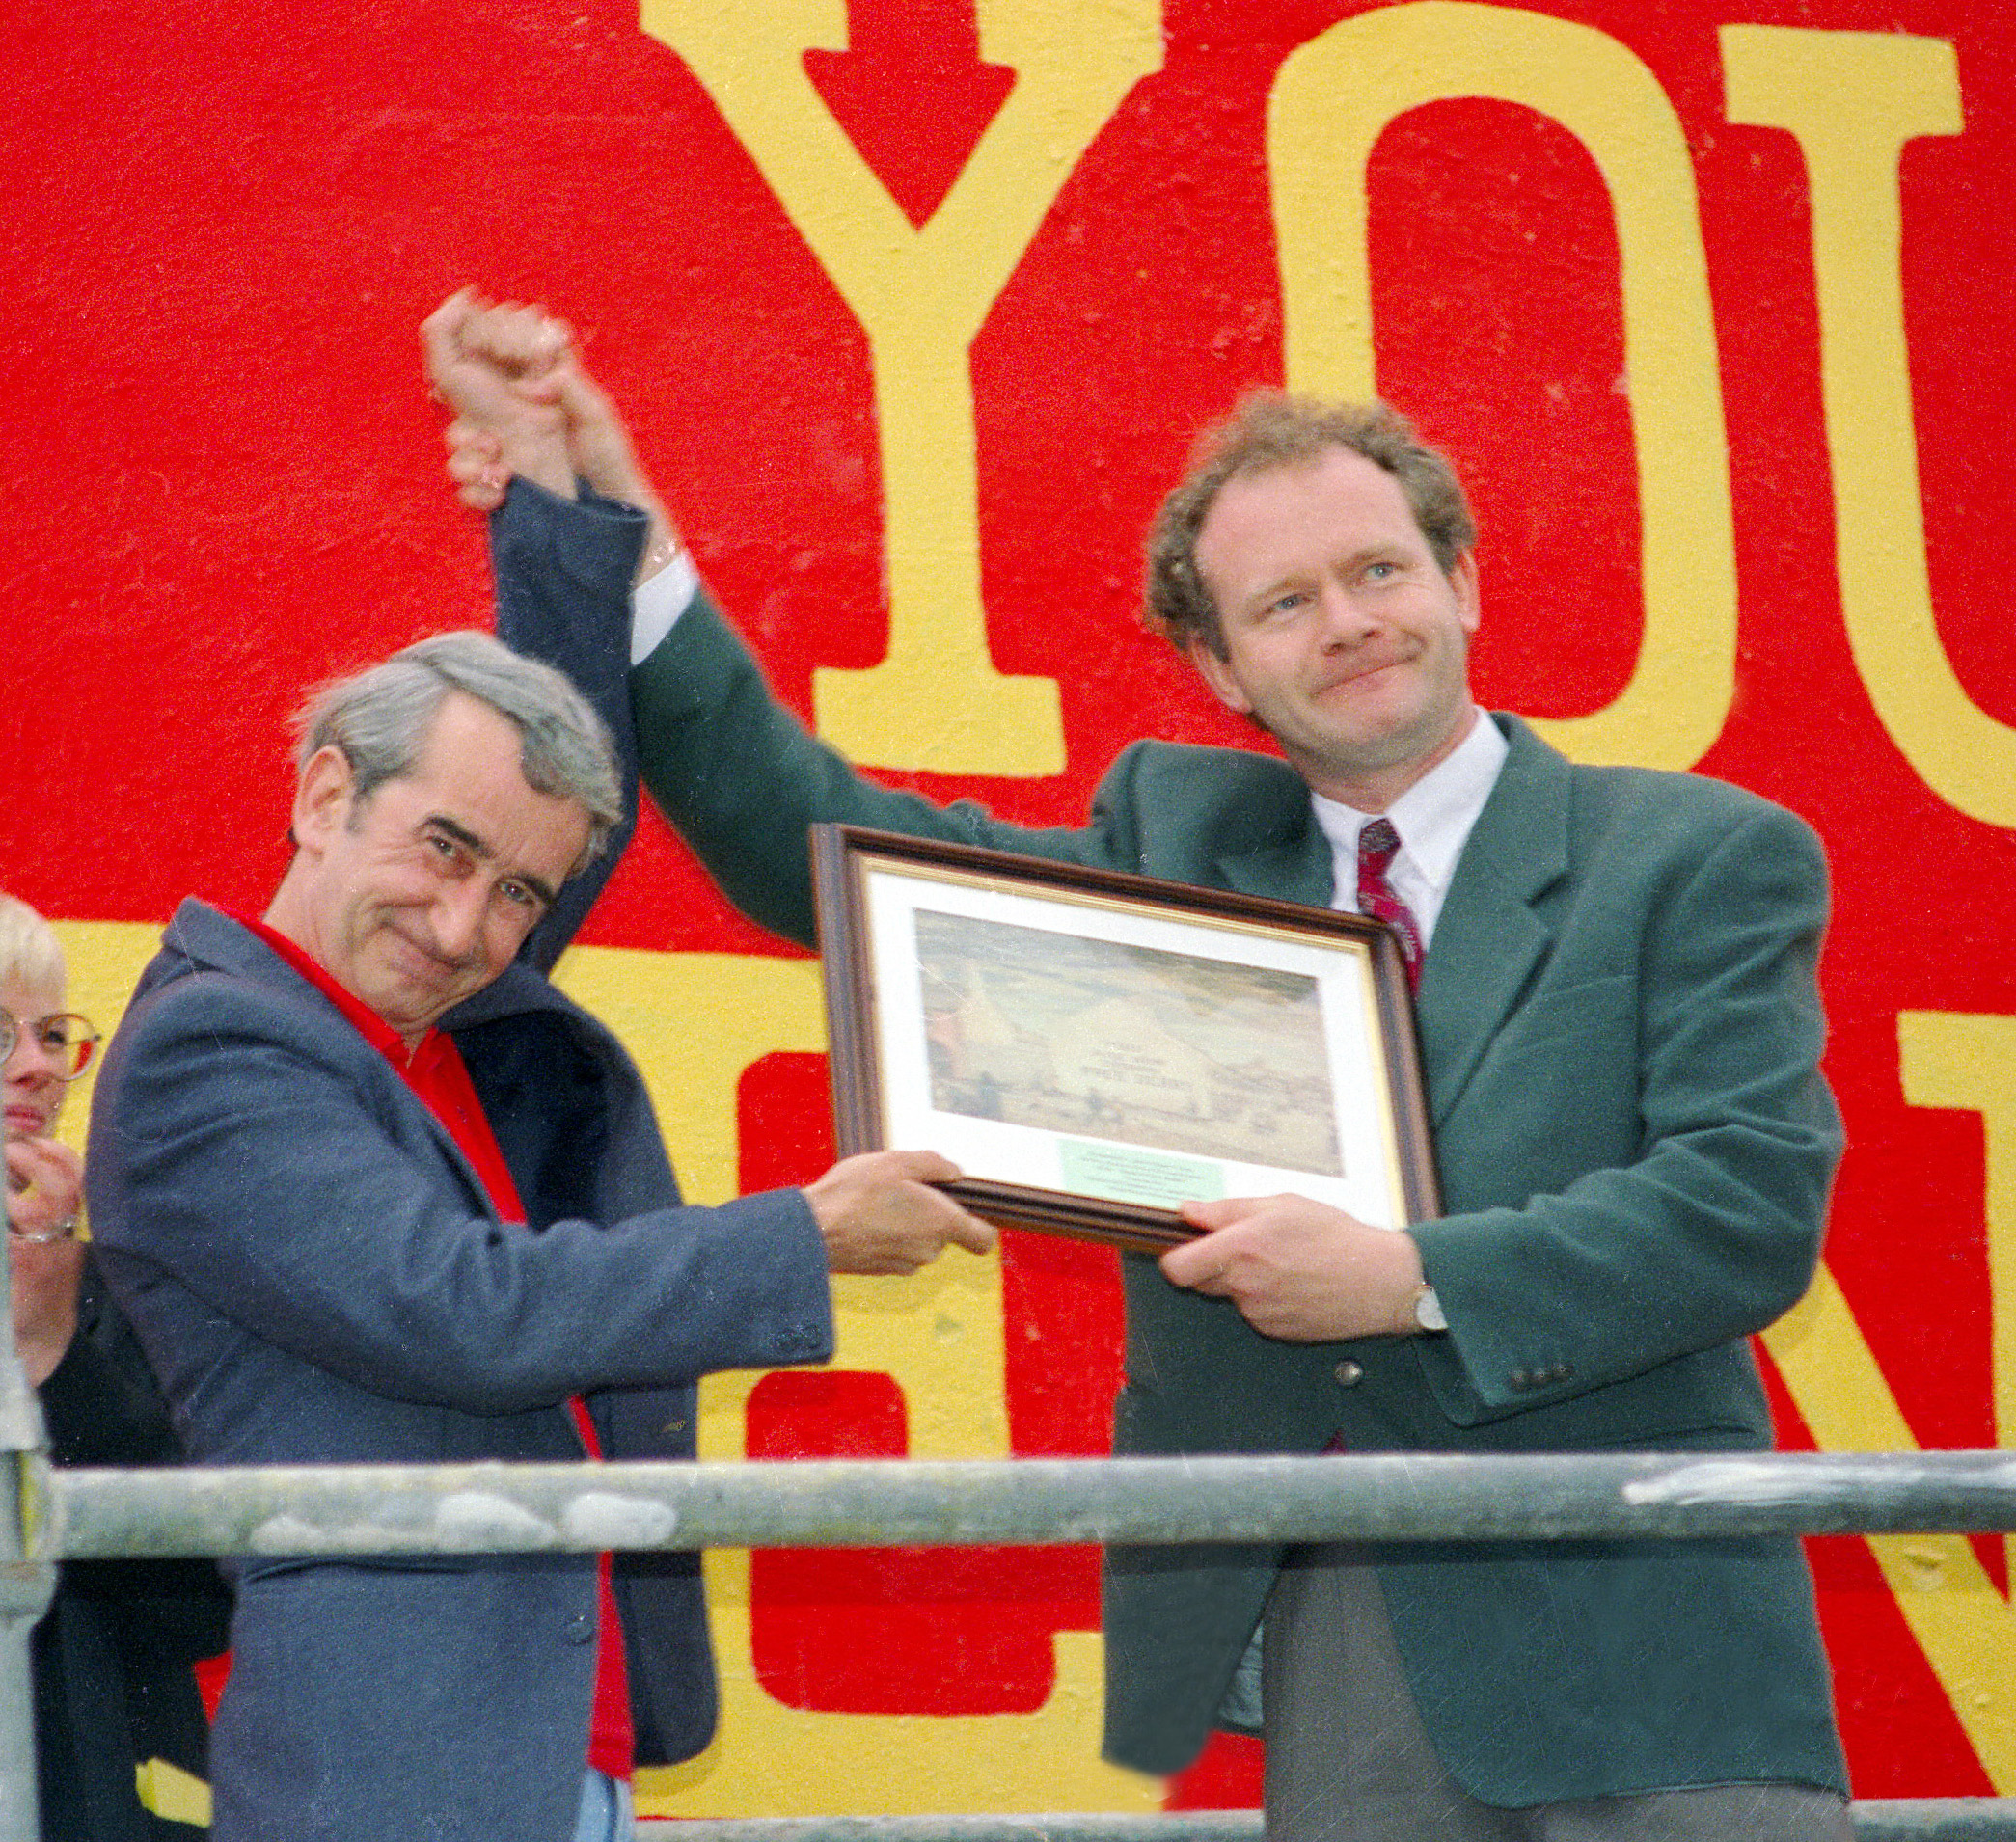 Caker-Casey-and-Martin-McGuinness-Free-Derry-Wall